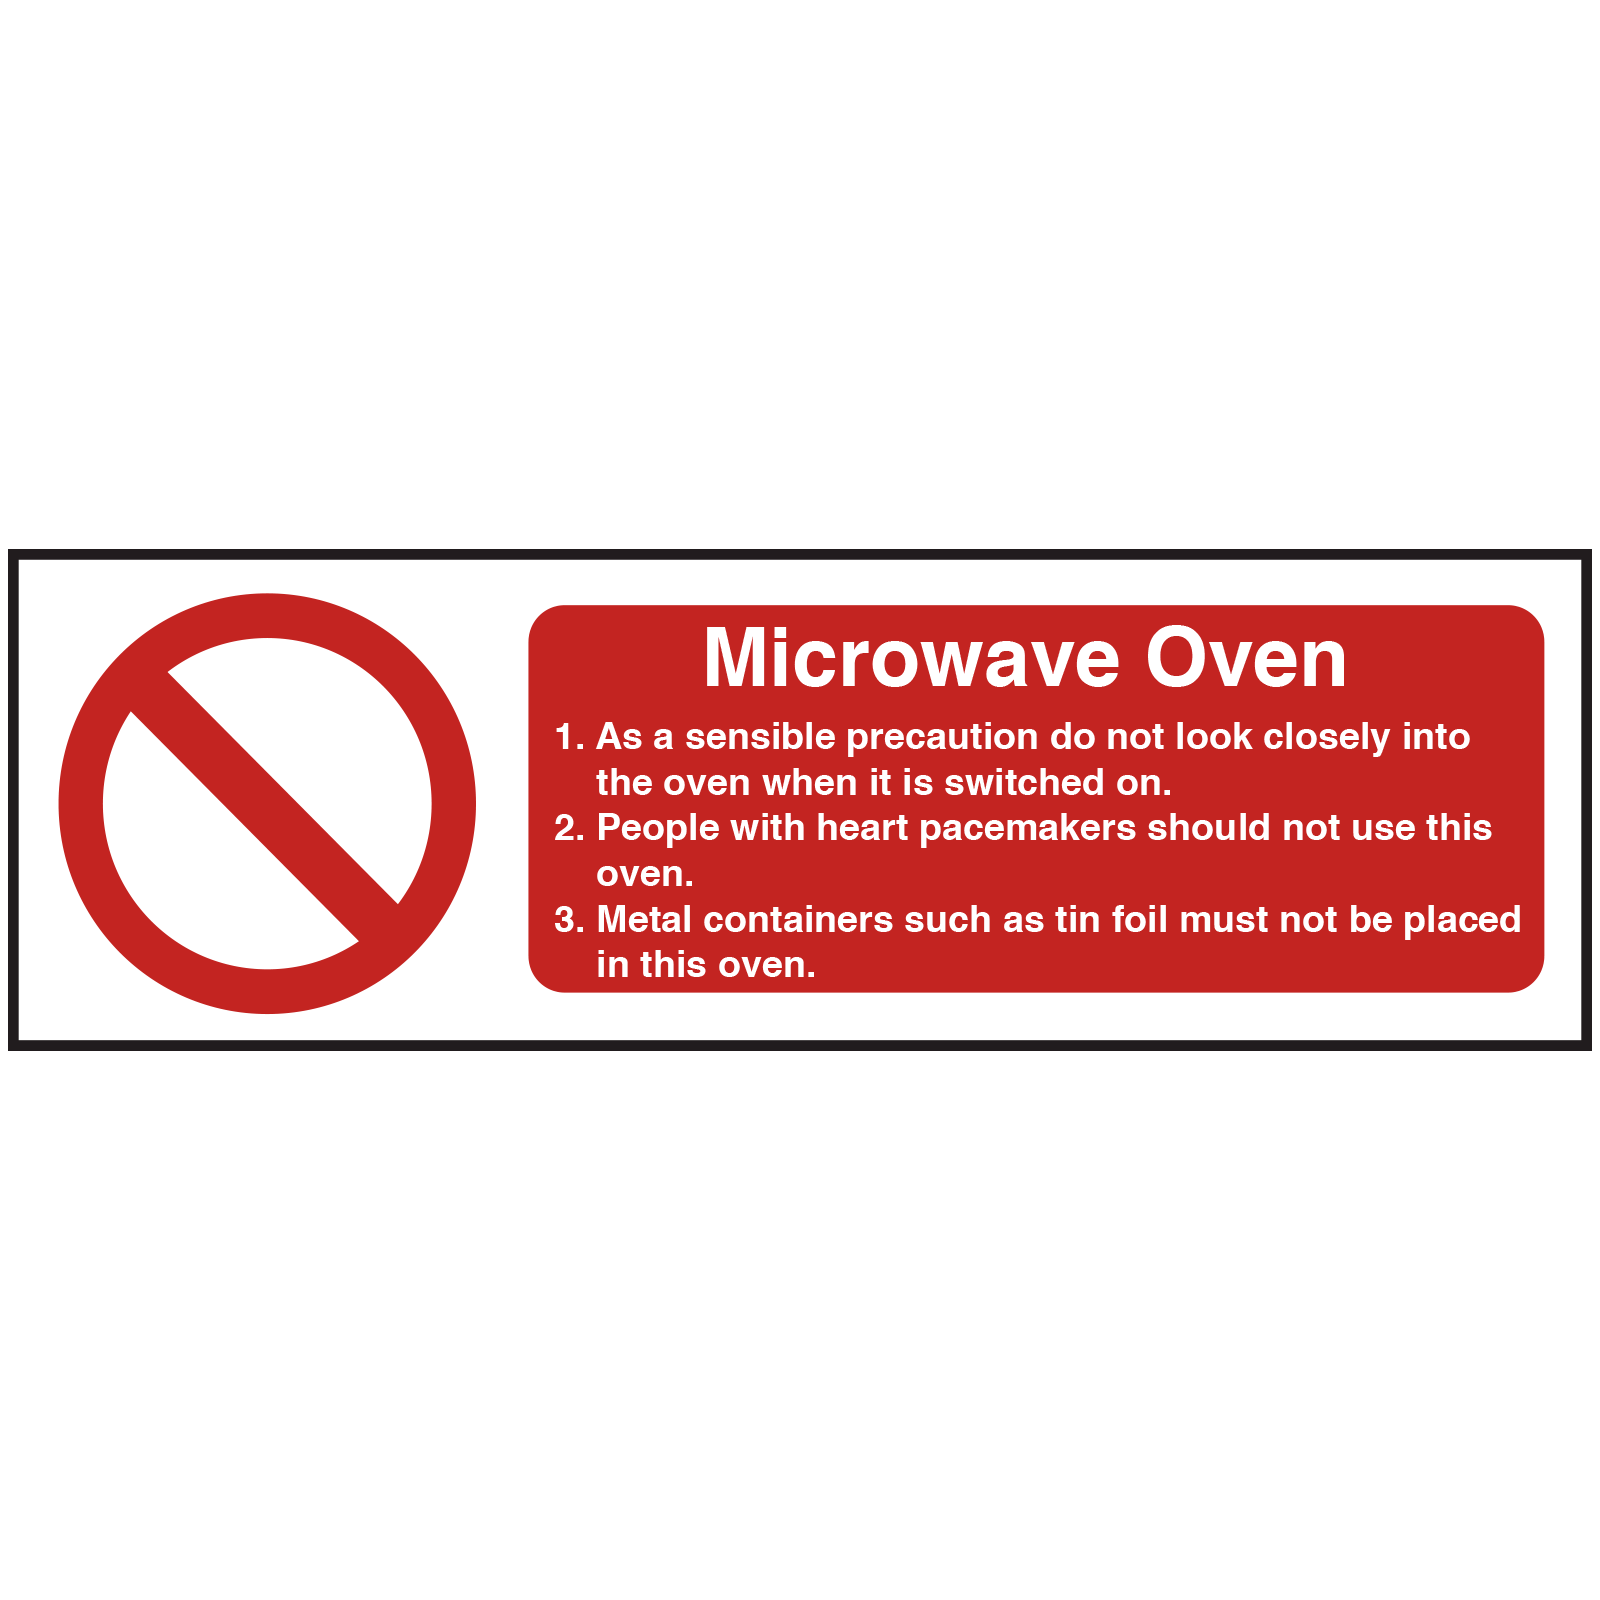 Microwave Oven Equipment Safety Notice